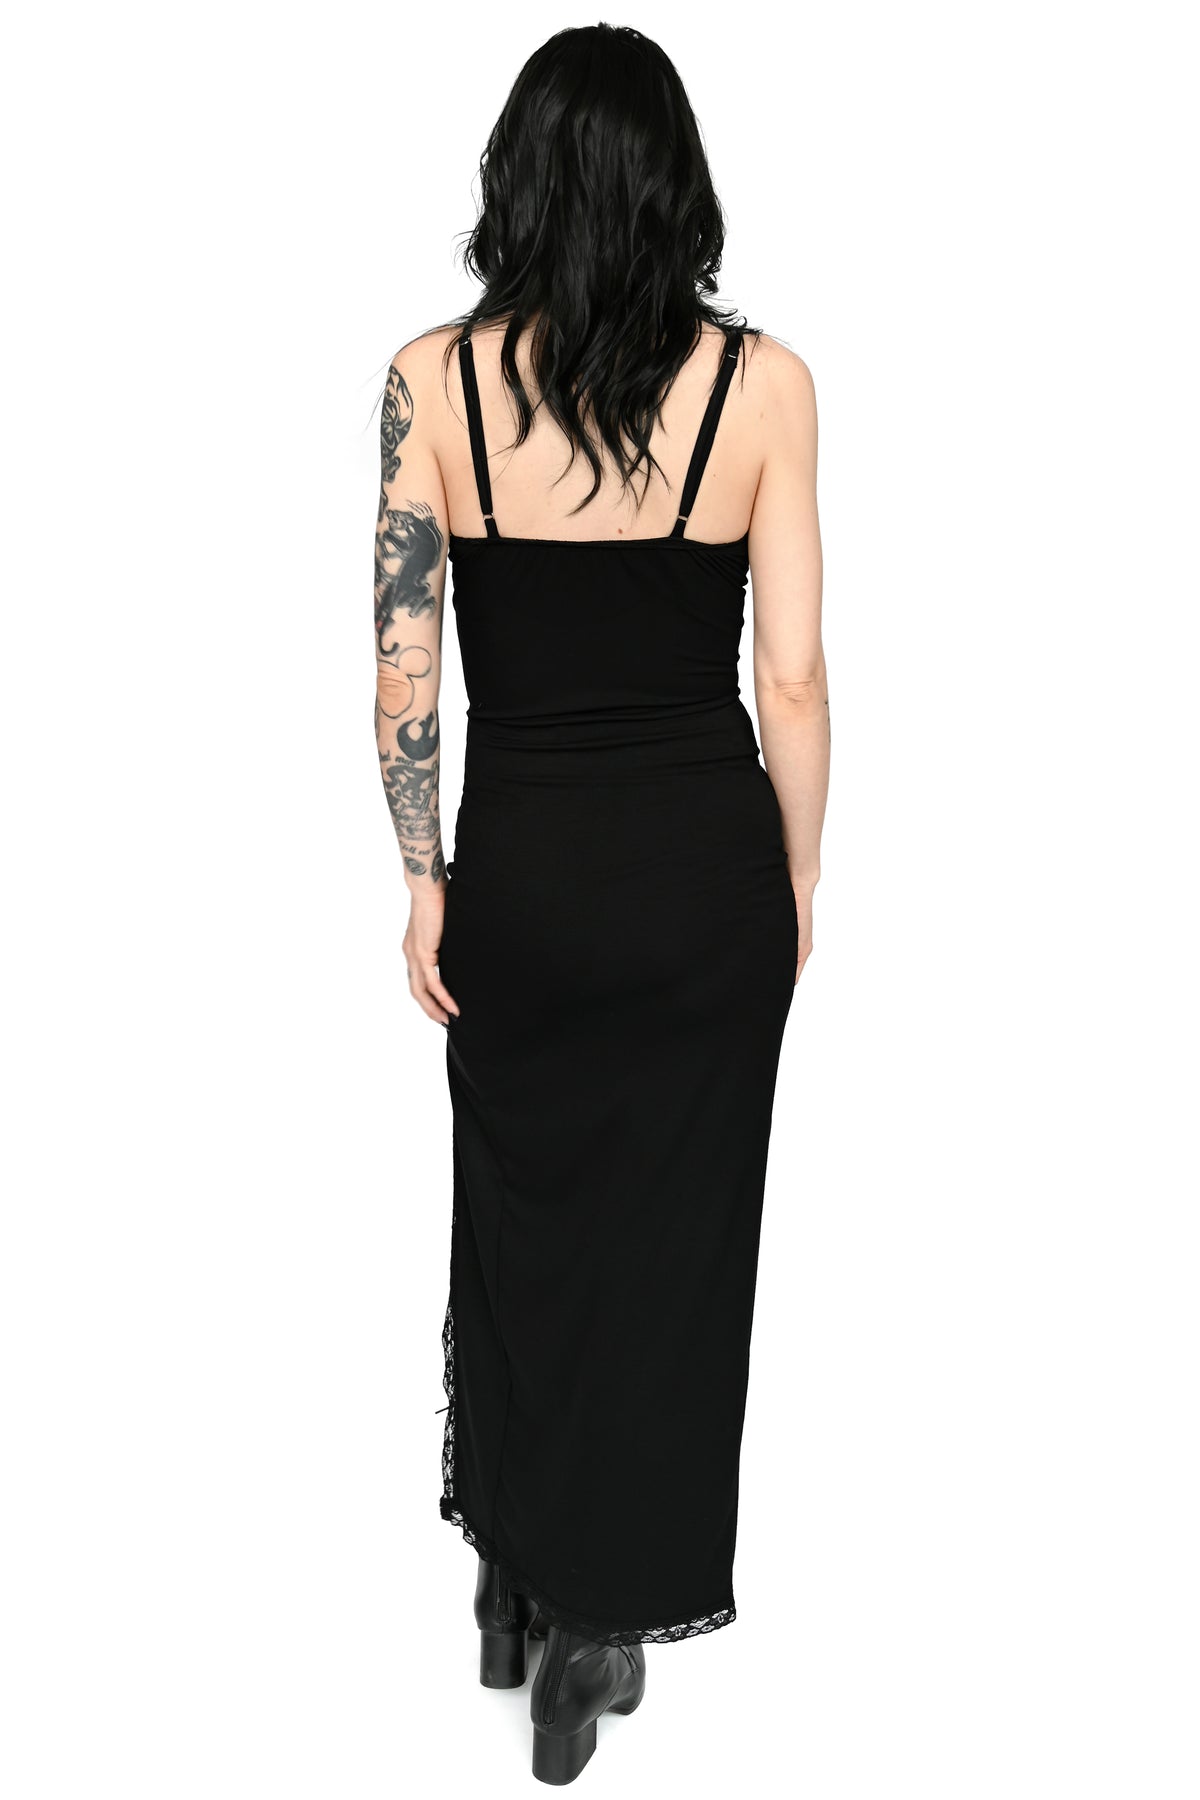 black maxi length dress with lace trim, spaghetti straps, and adjustable keyhole